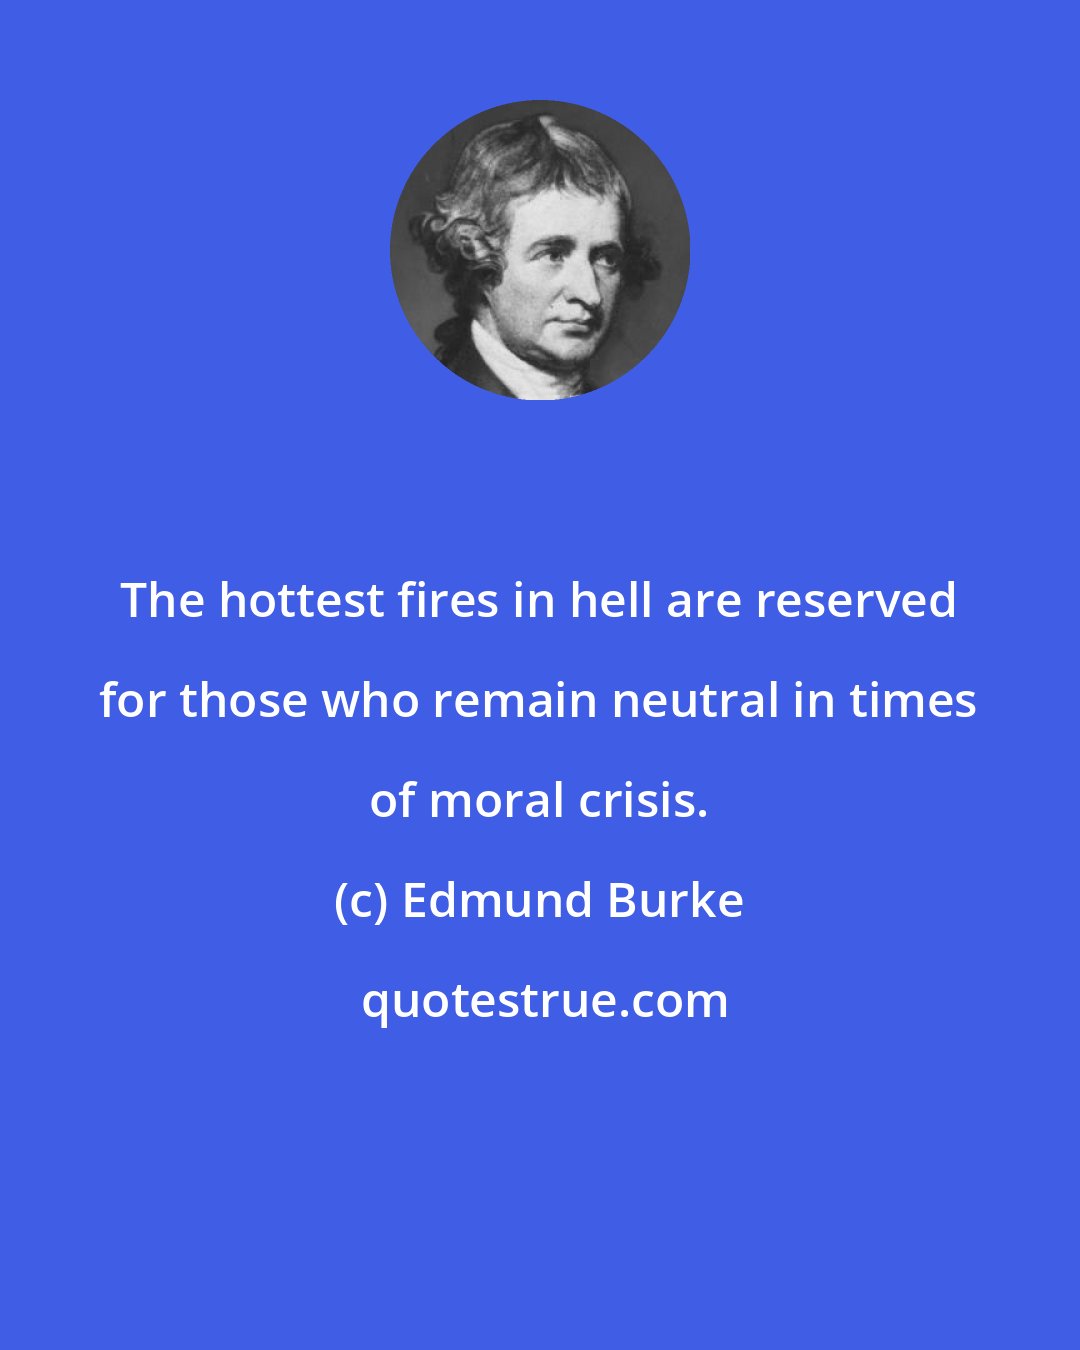 Edmund Burke: The hottest fires in hell are reserved for those who remain neutral in times of moral crisis.